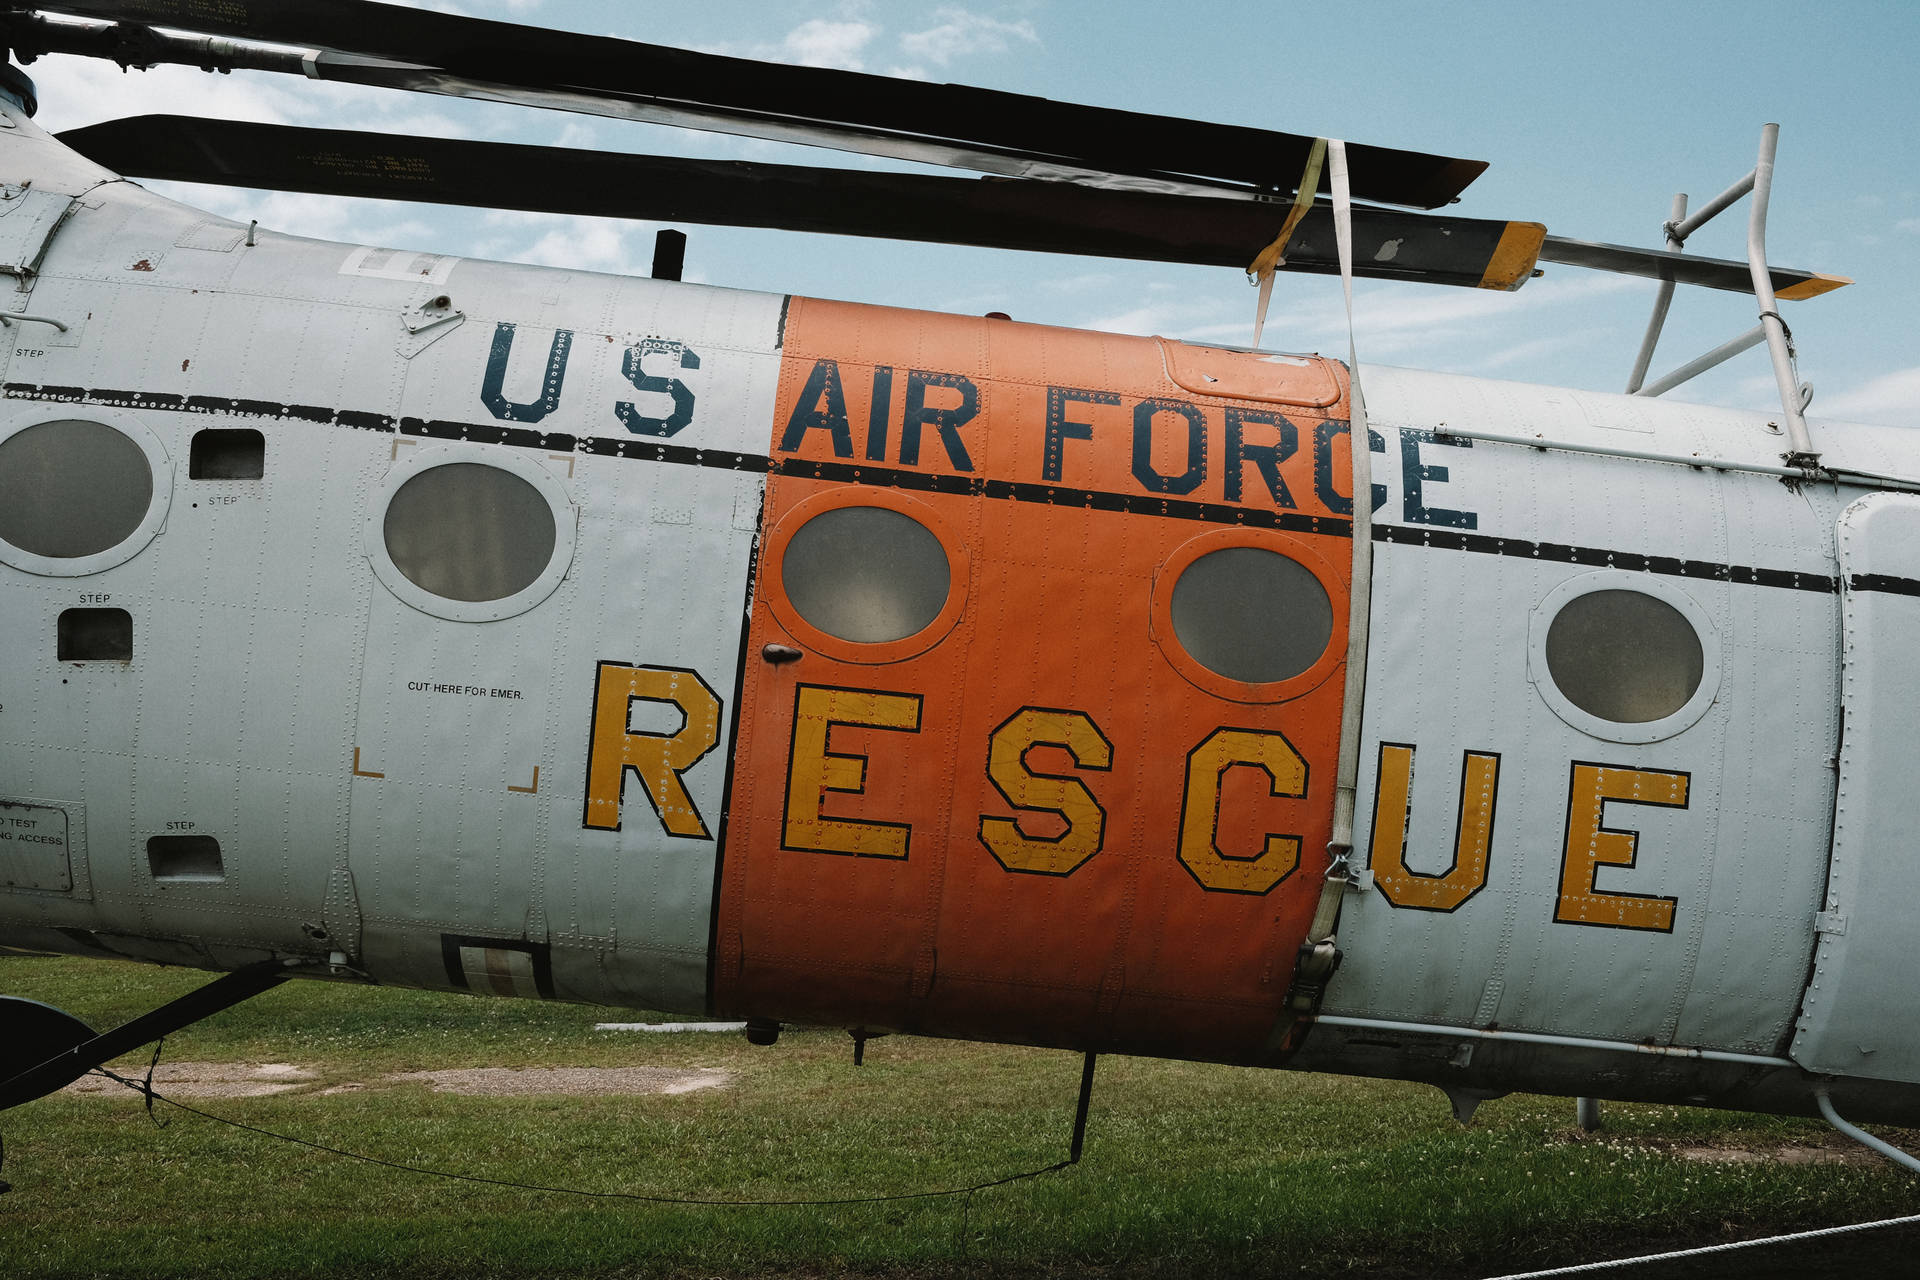 Us Air Force Rescue Plane